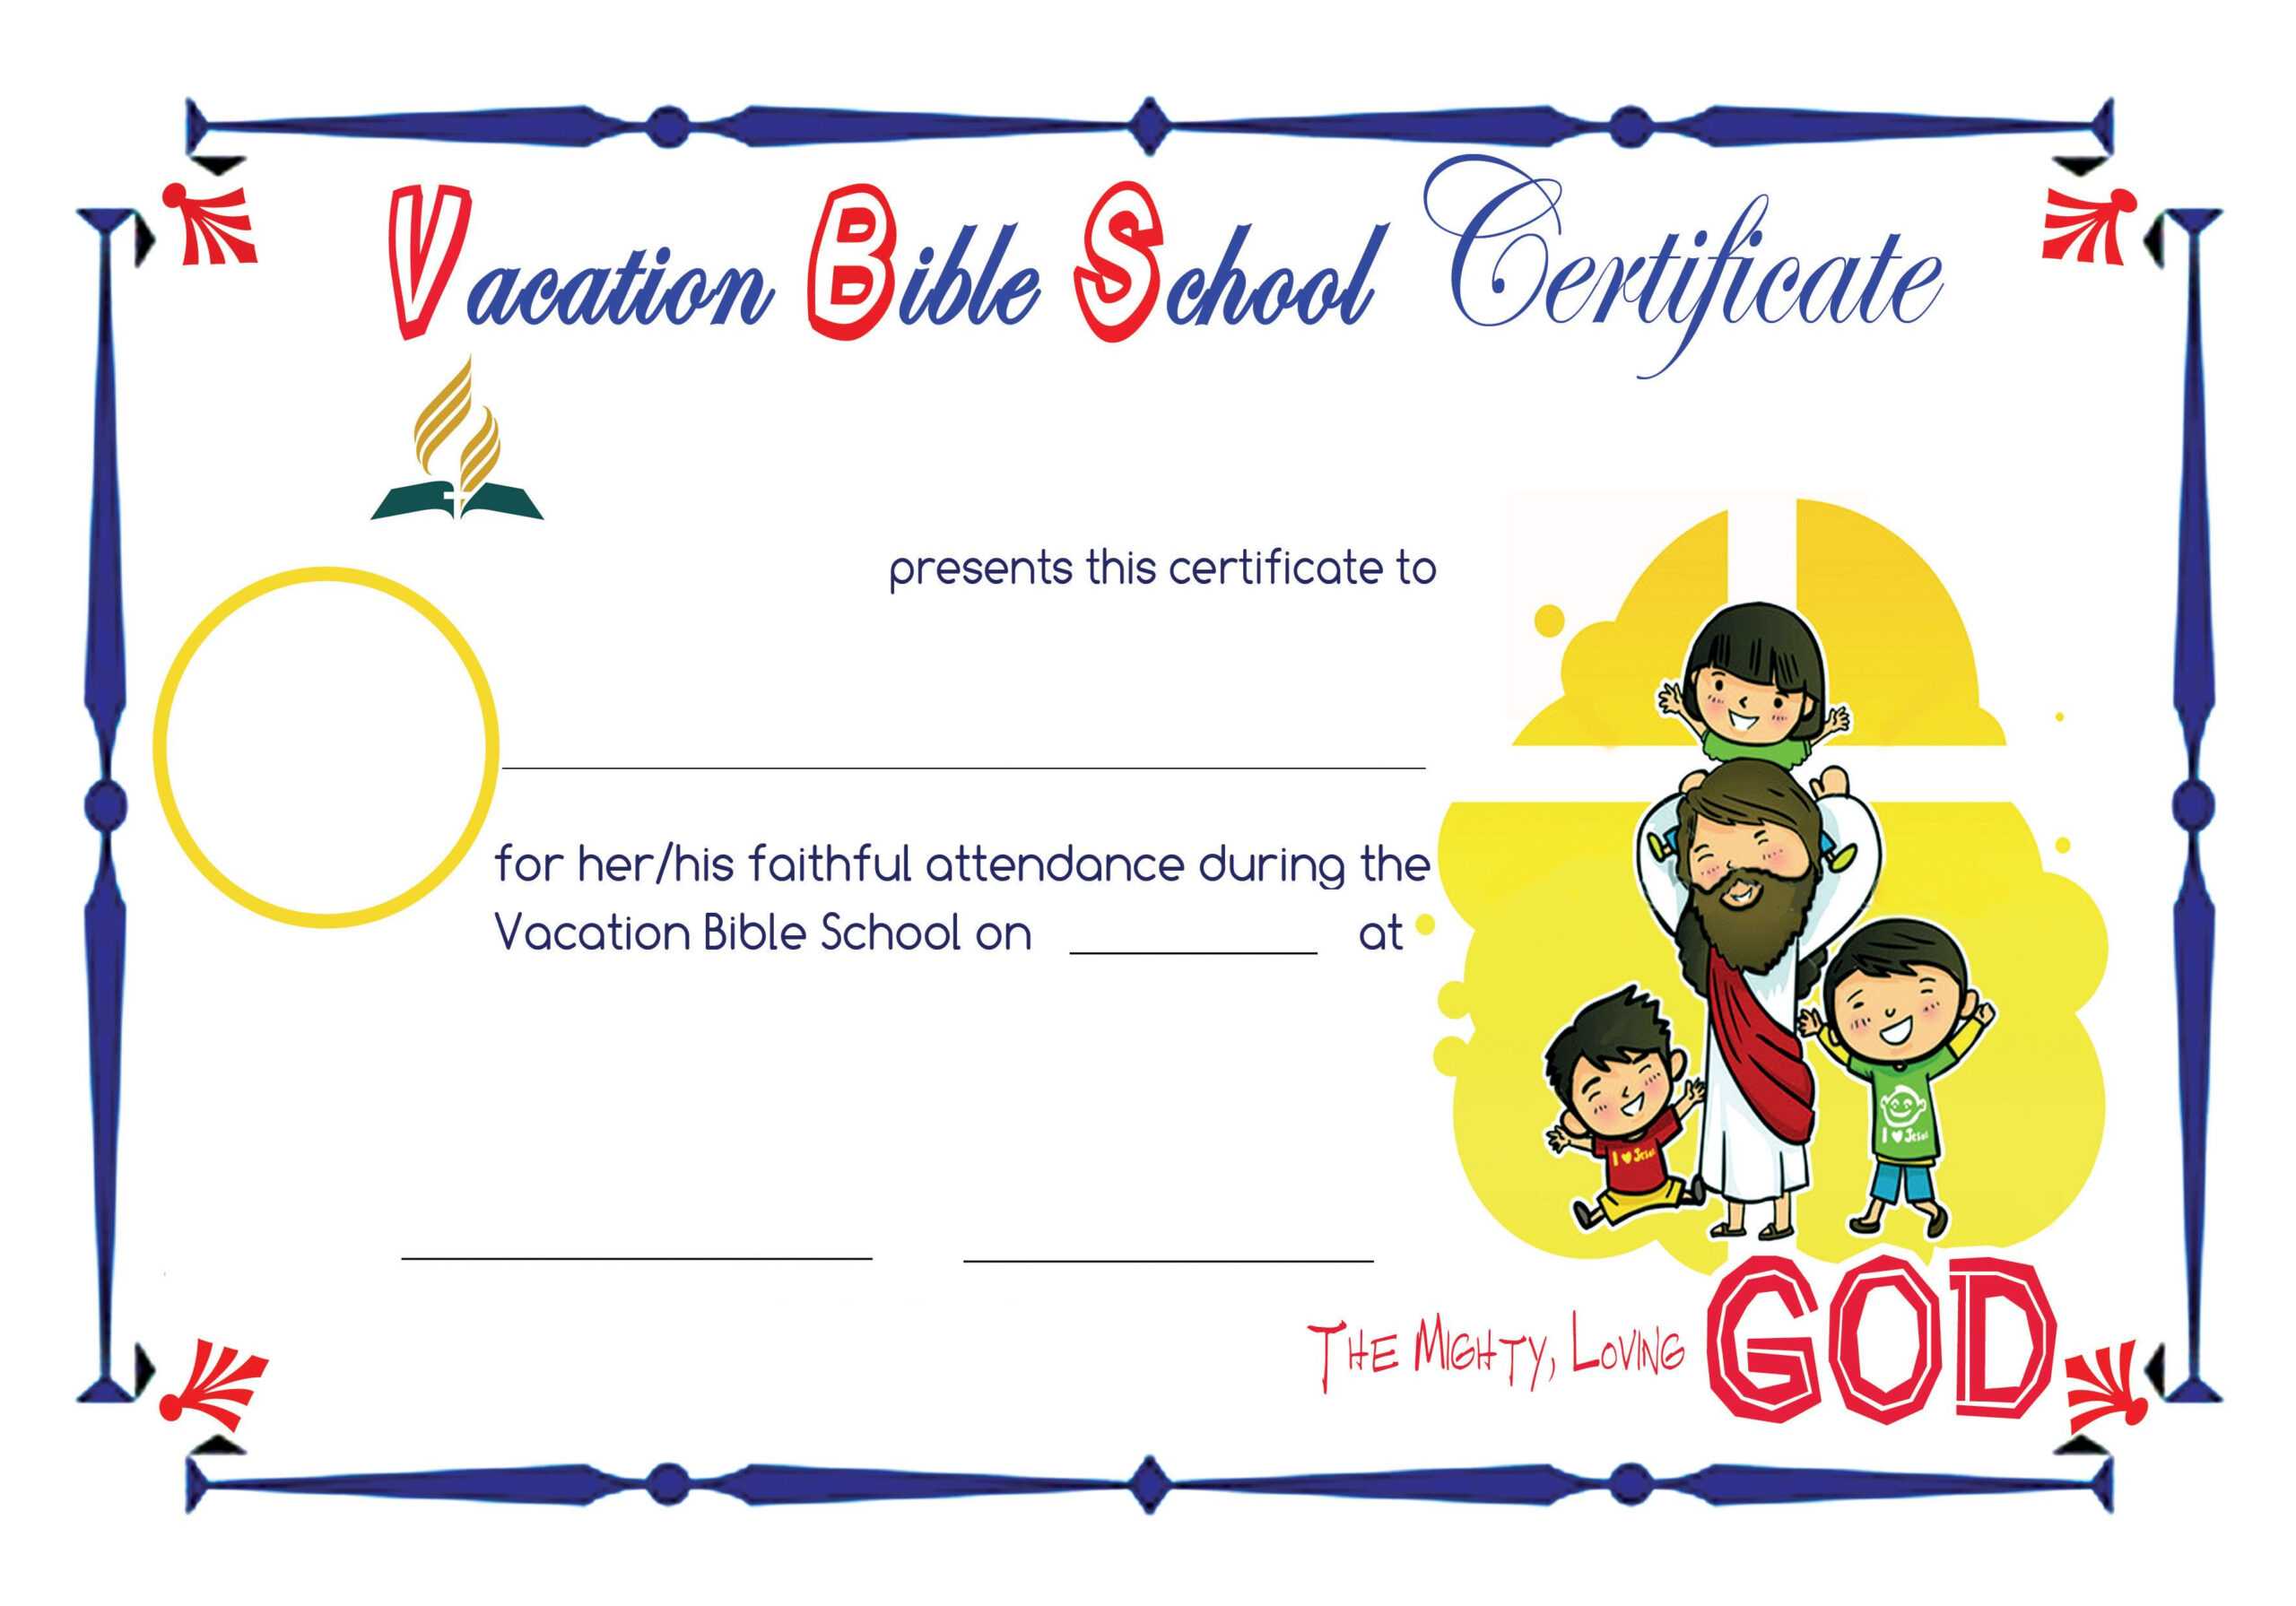 Bible School Certificates Pictures To Pin On Pinterest Throughout Christian Certificate Template